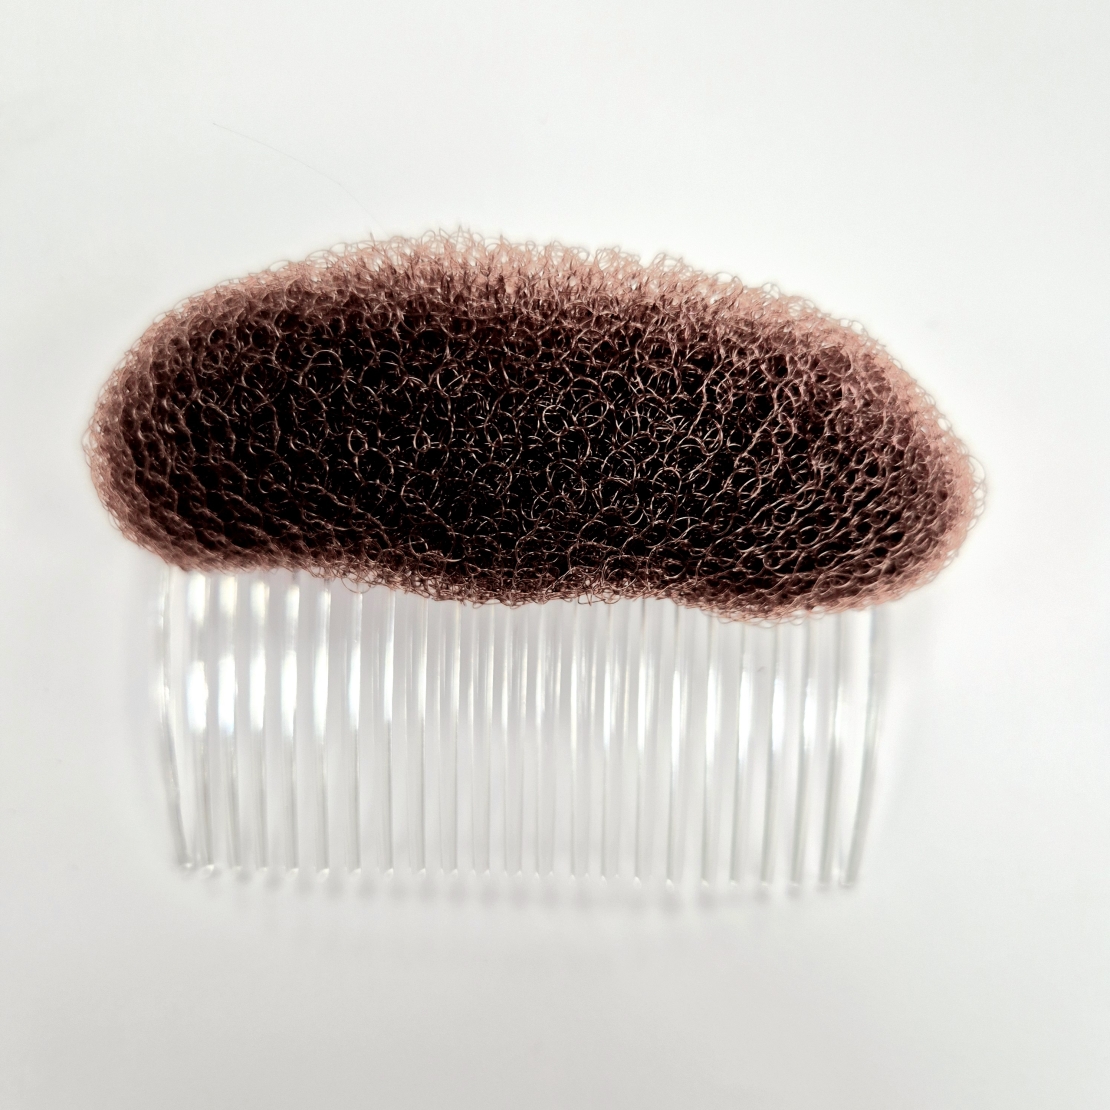 Sponge for filling and lifting hair